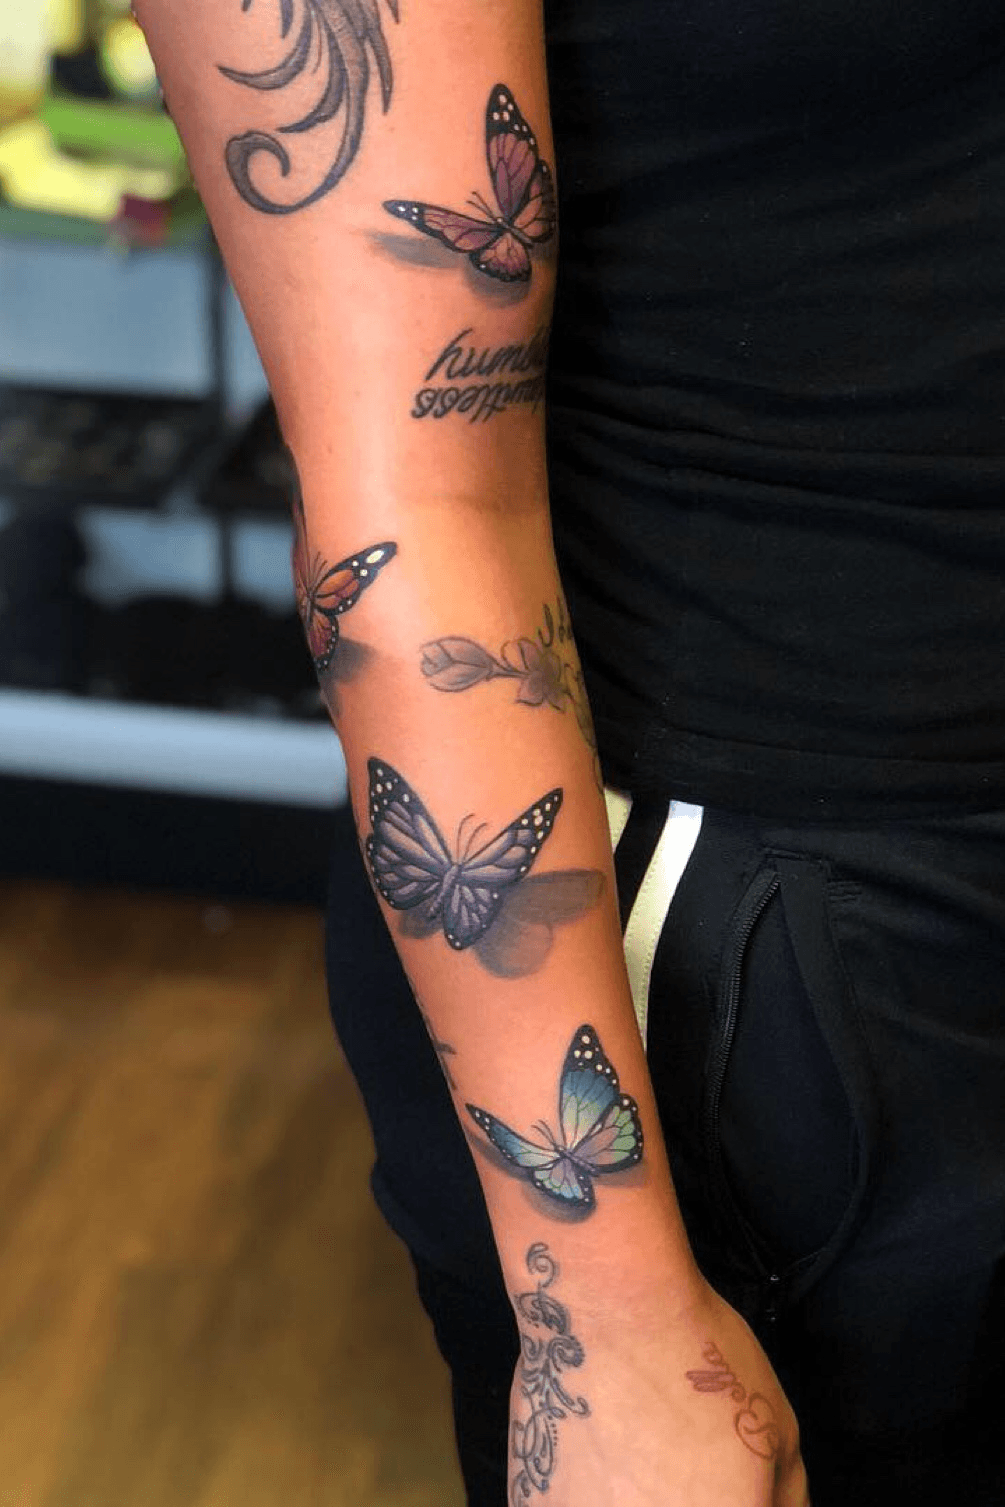 Tattoo uploaded by NYCinkmaster • 3d butterfly tattoo • Tattoodo